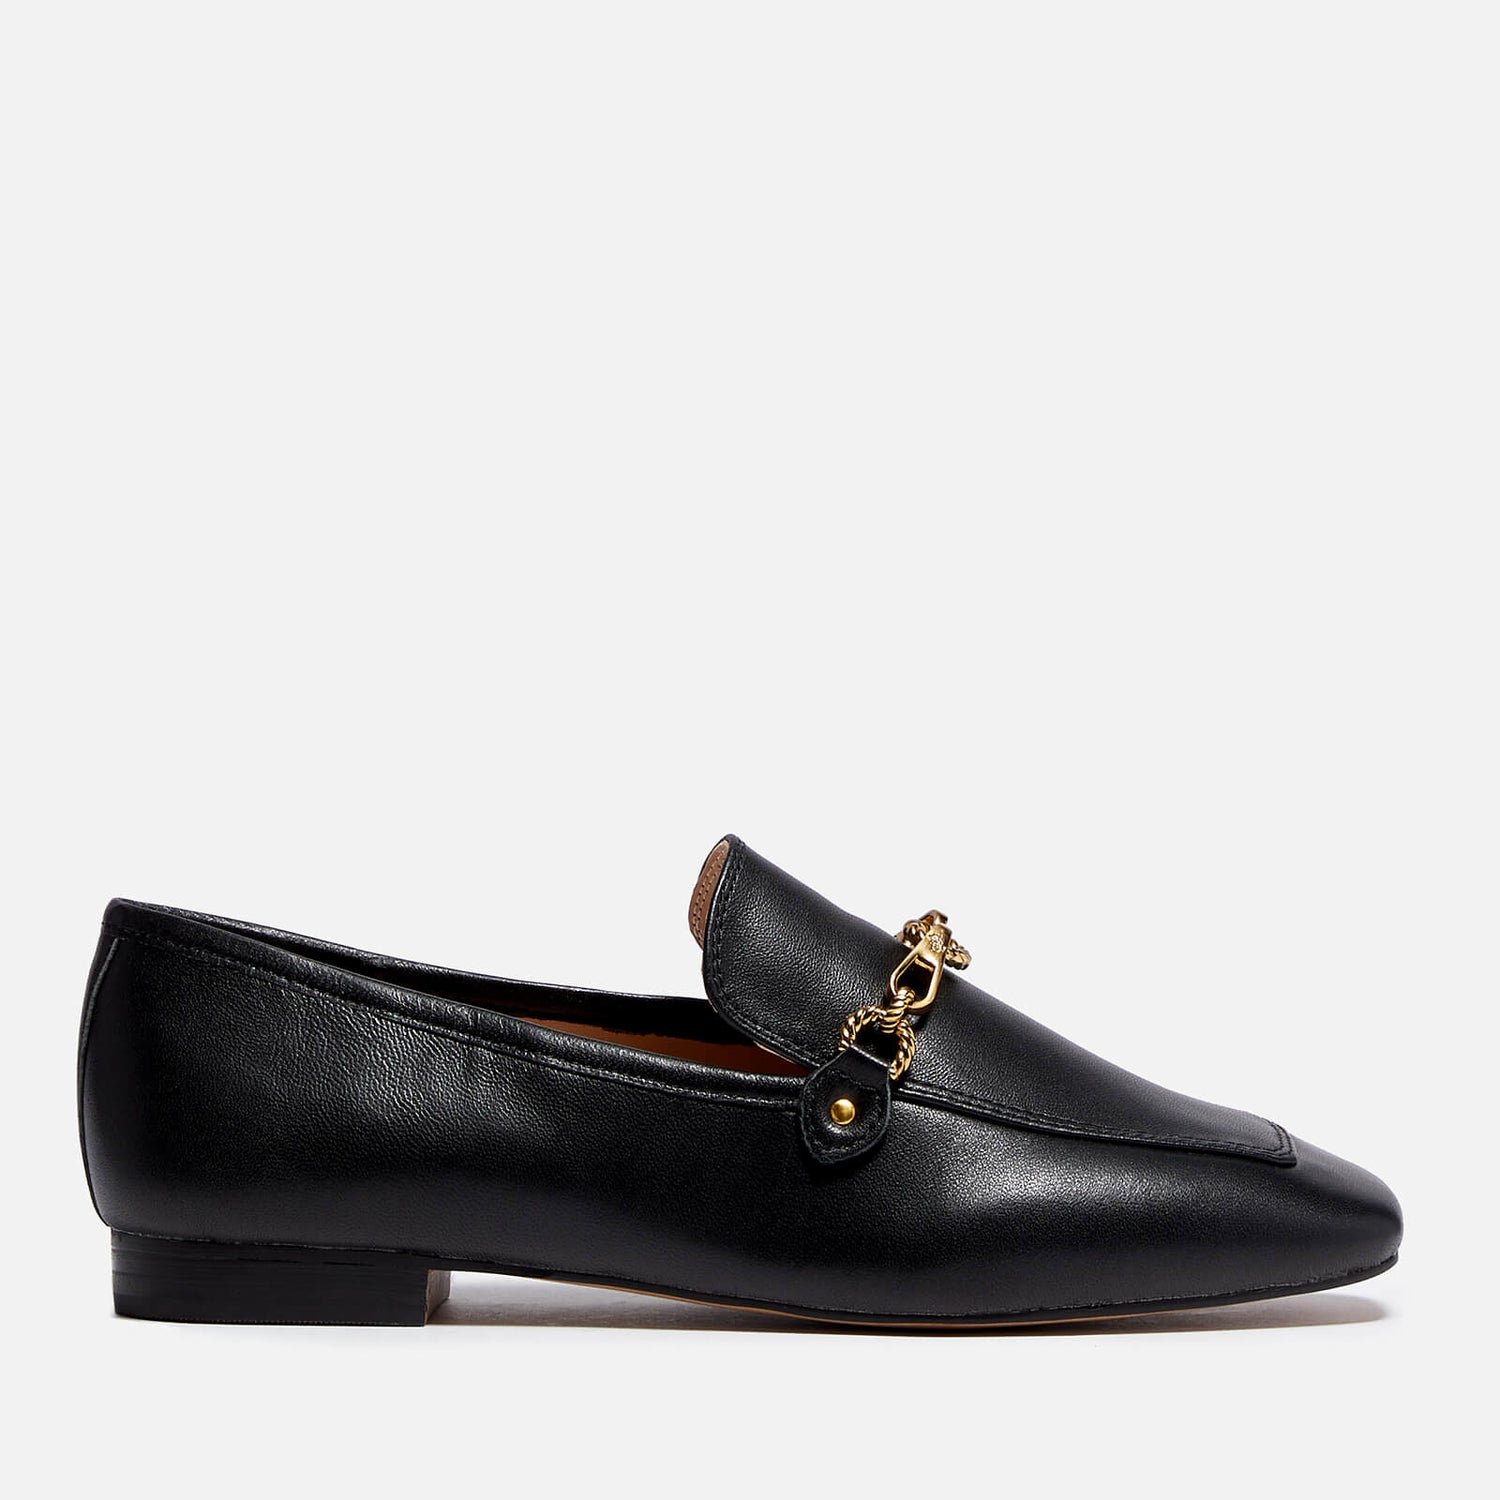 Guess Marta Embellished Leather Loafers | TheHut.com